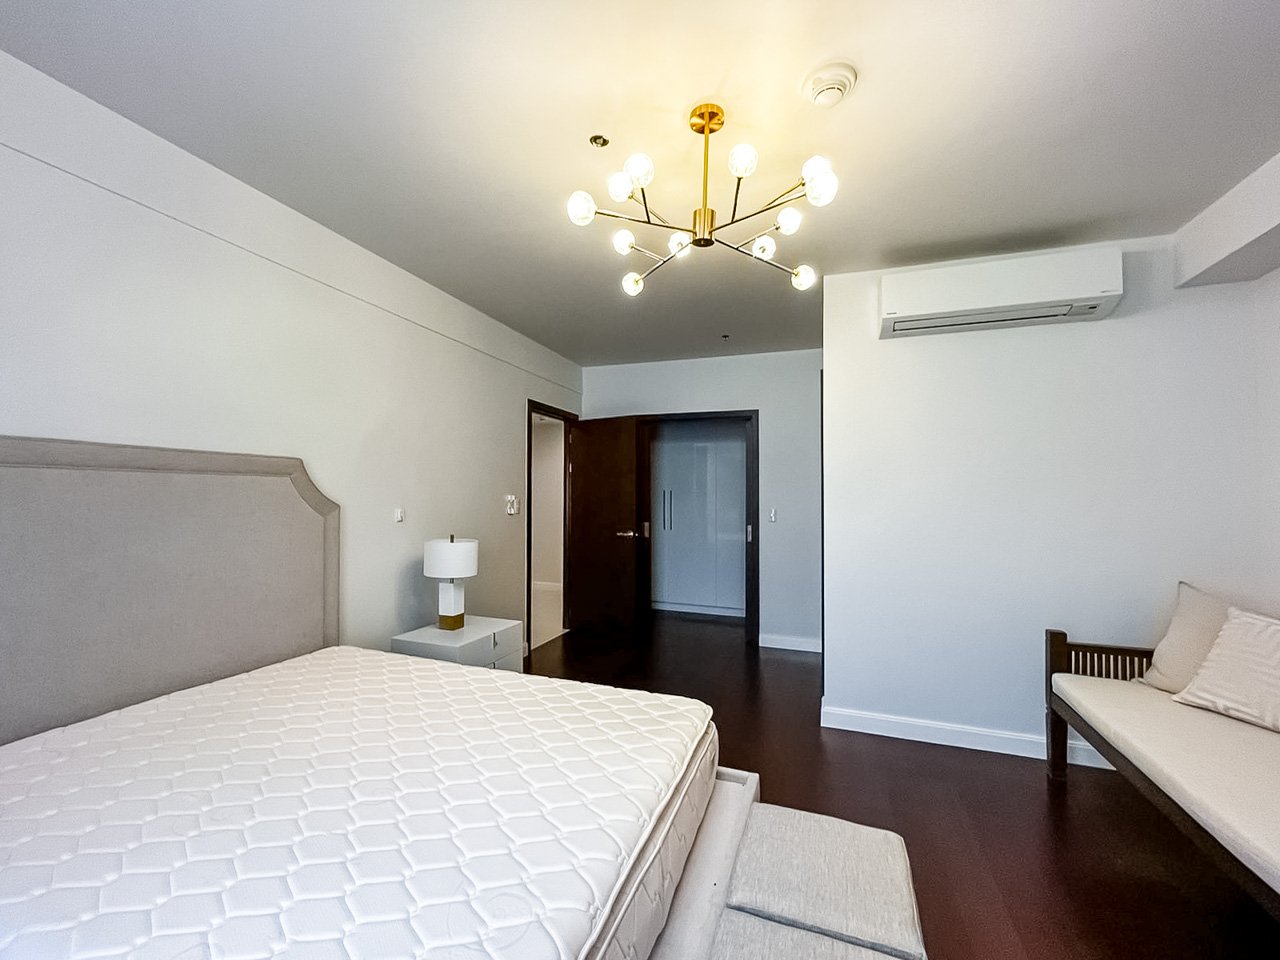 RCALC9 Furnished 2 Bedroom Condo for Rent in Cebu Business Park - 8